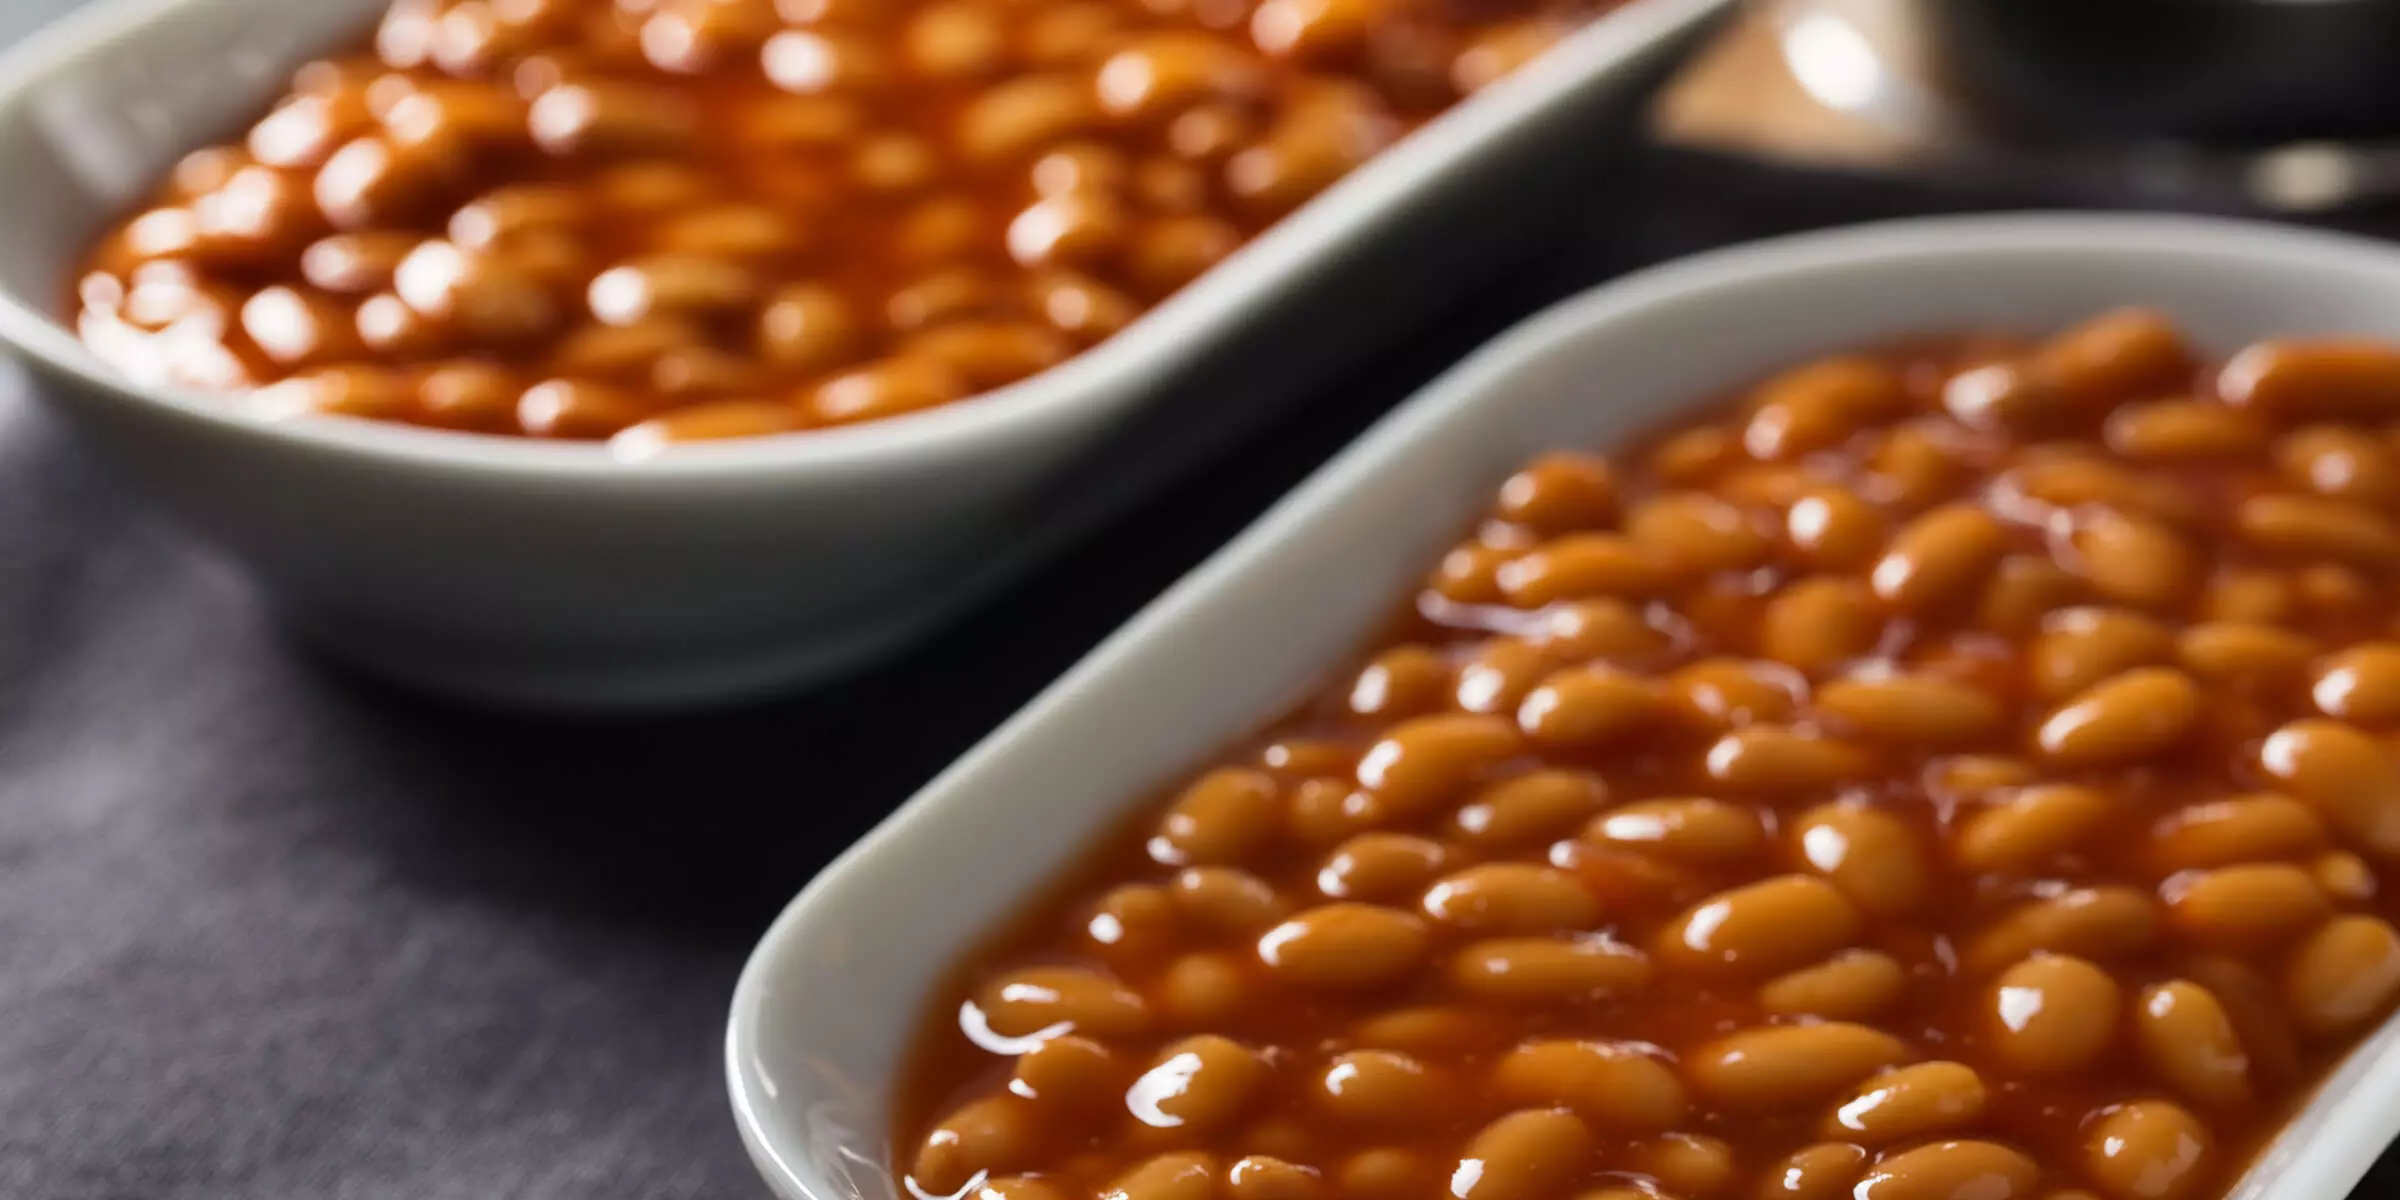 Baked Beans Reduce ApoB-100 Levels, finds study